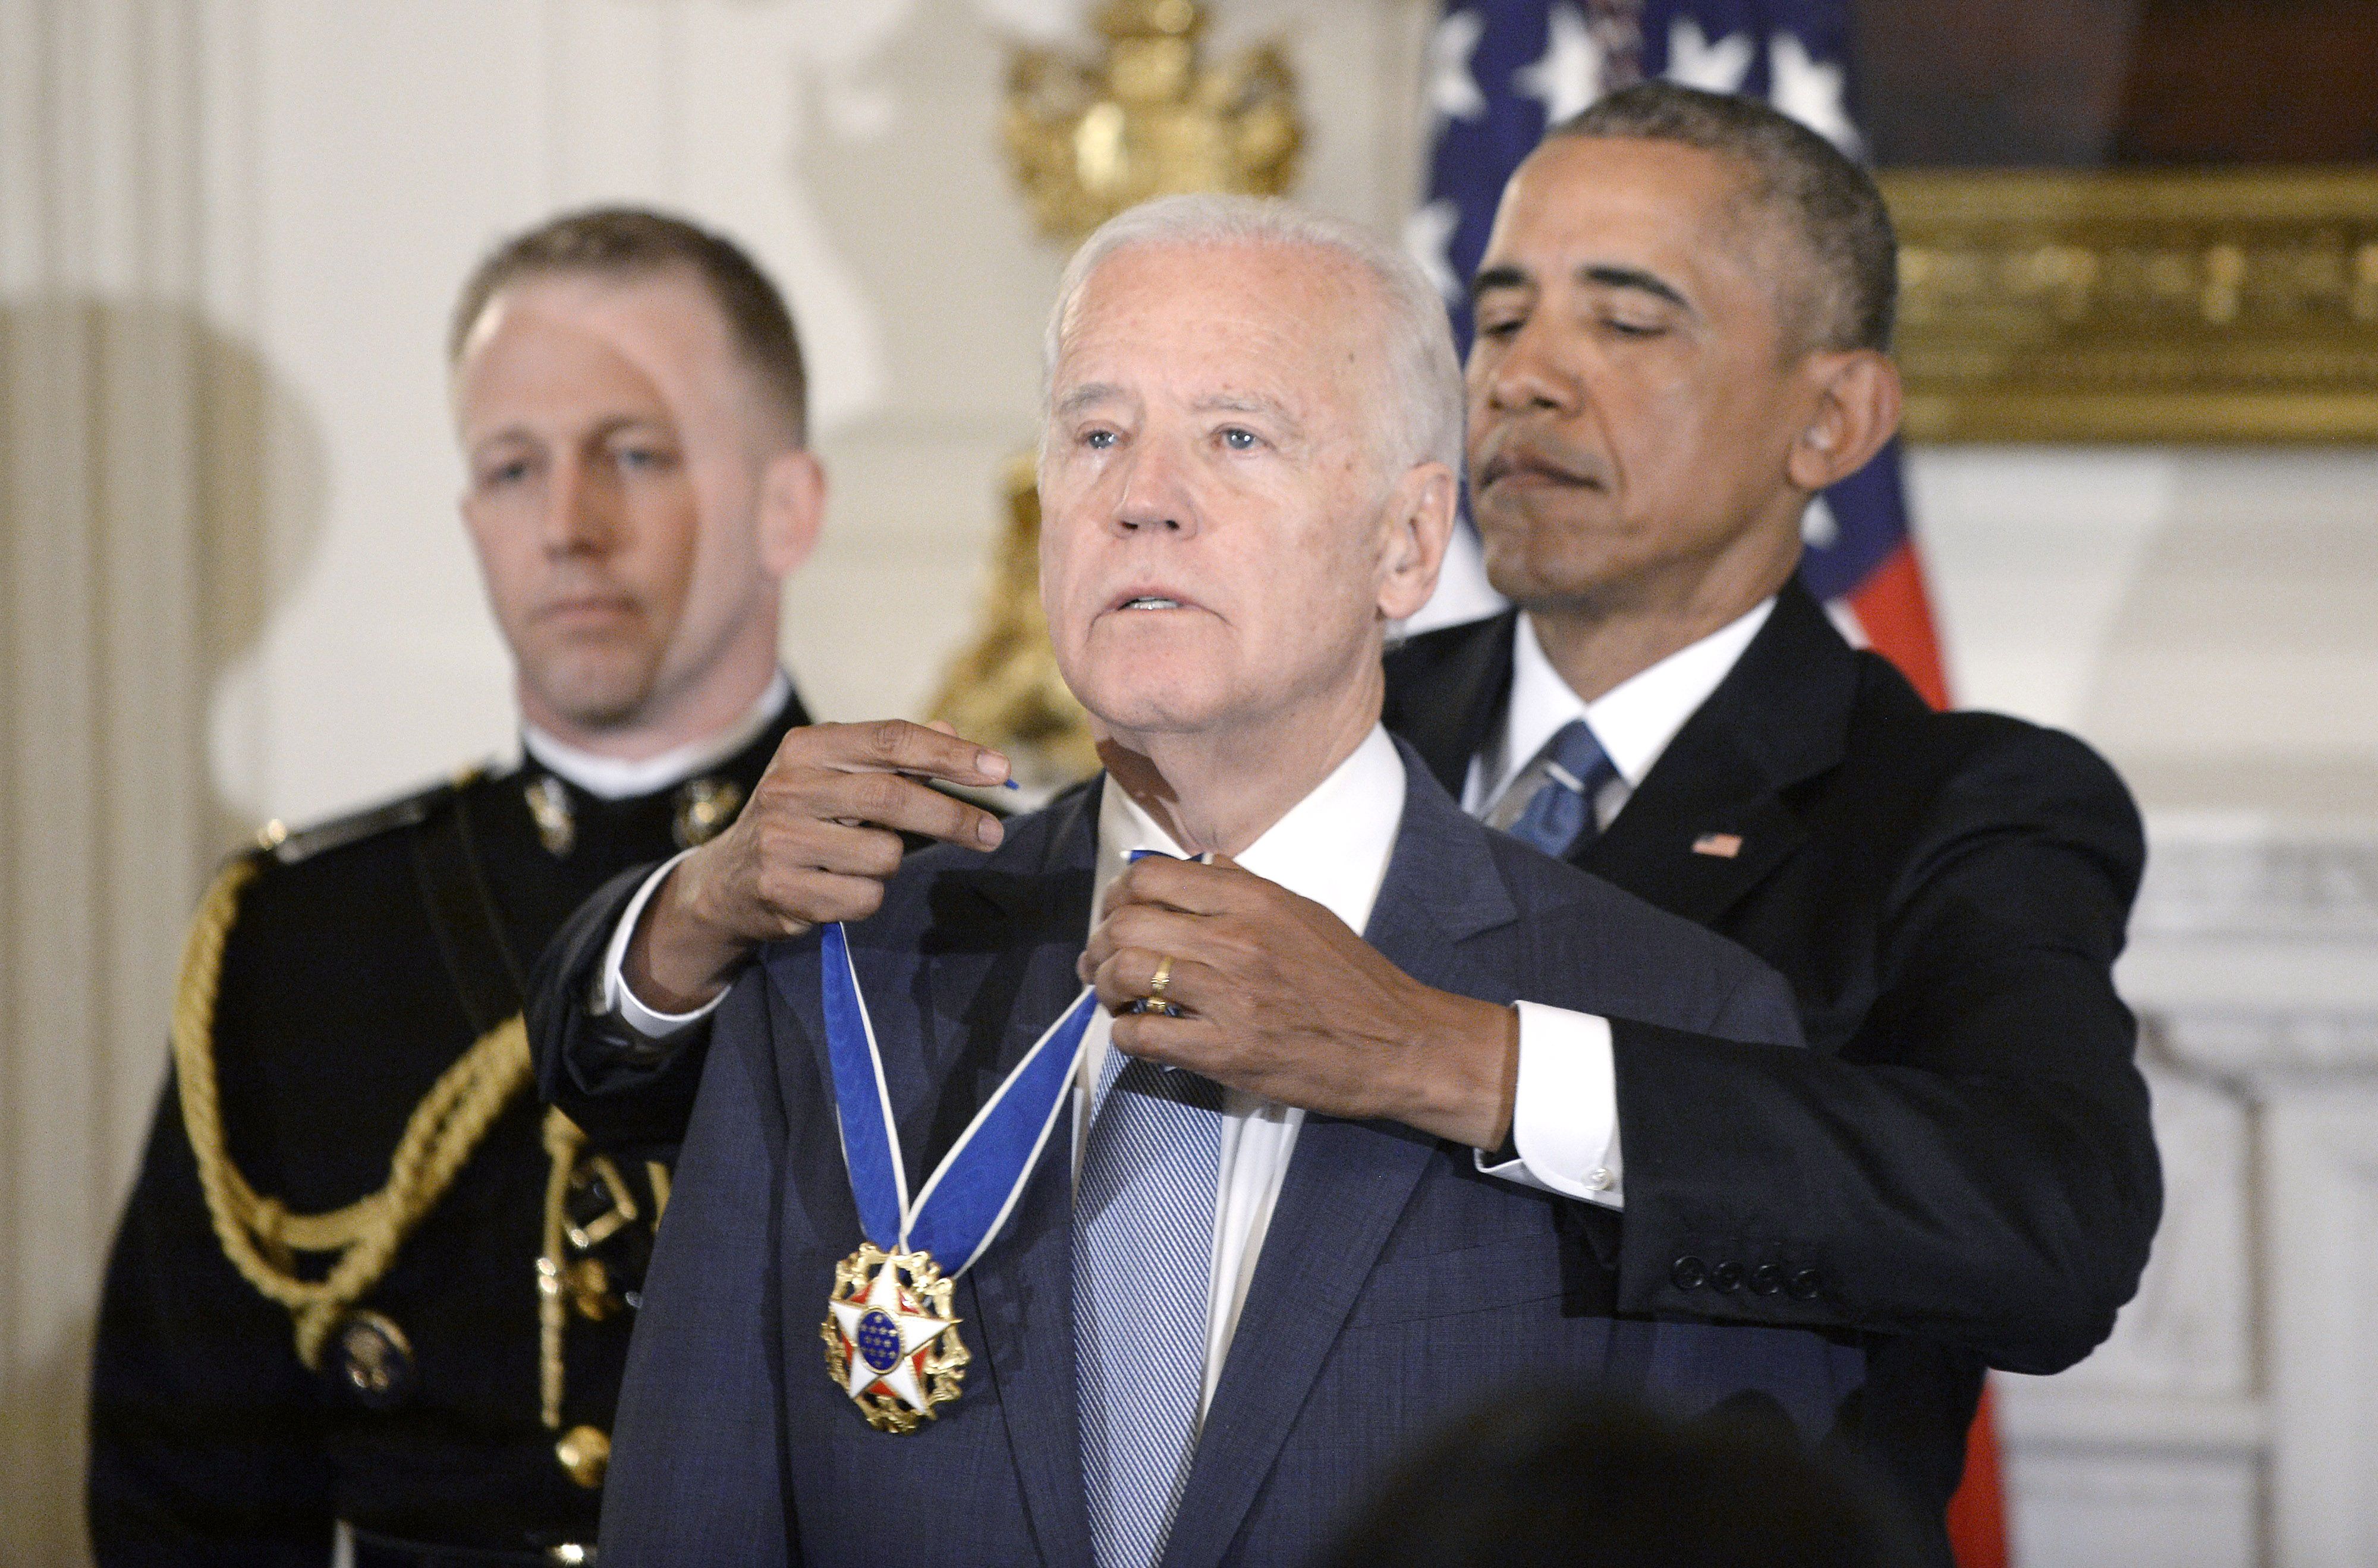 Obama Surprises Biden with Medal Freedom Twitter Reactions